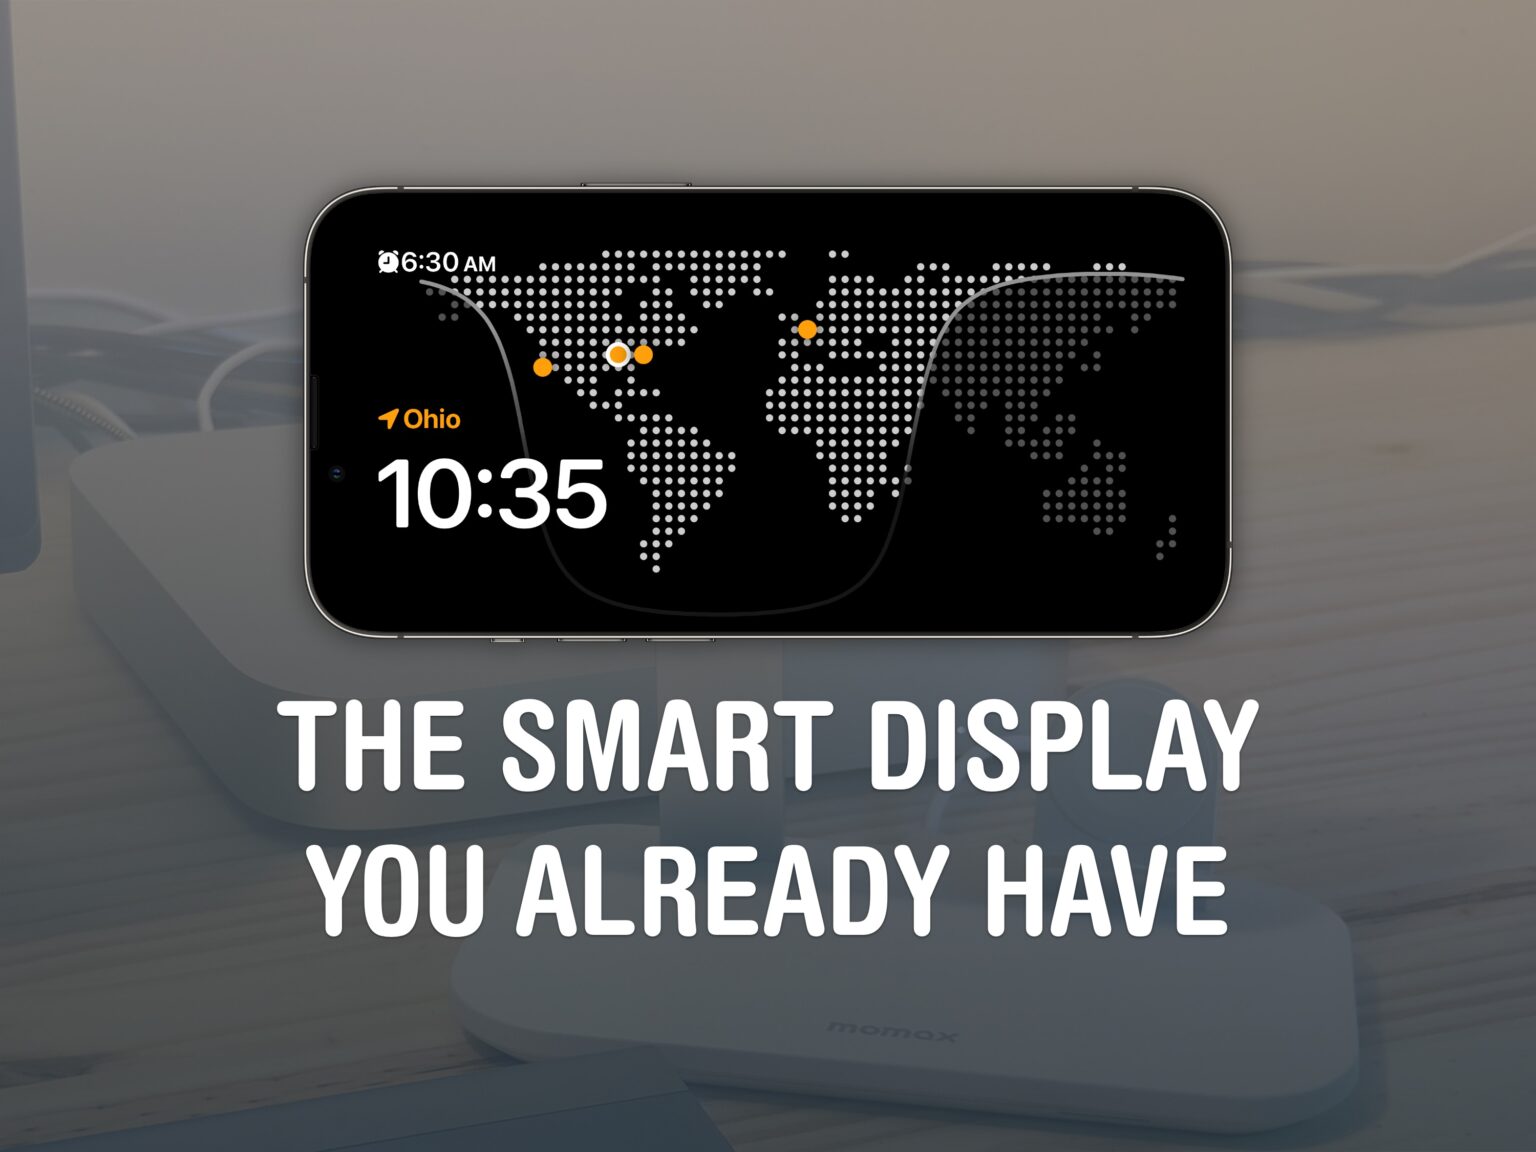 The Smart Display You Already Own